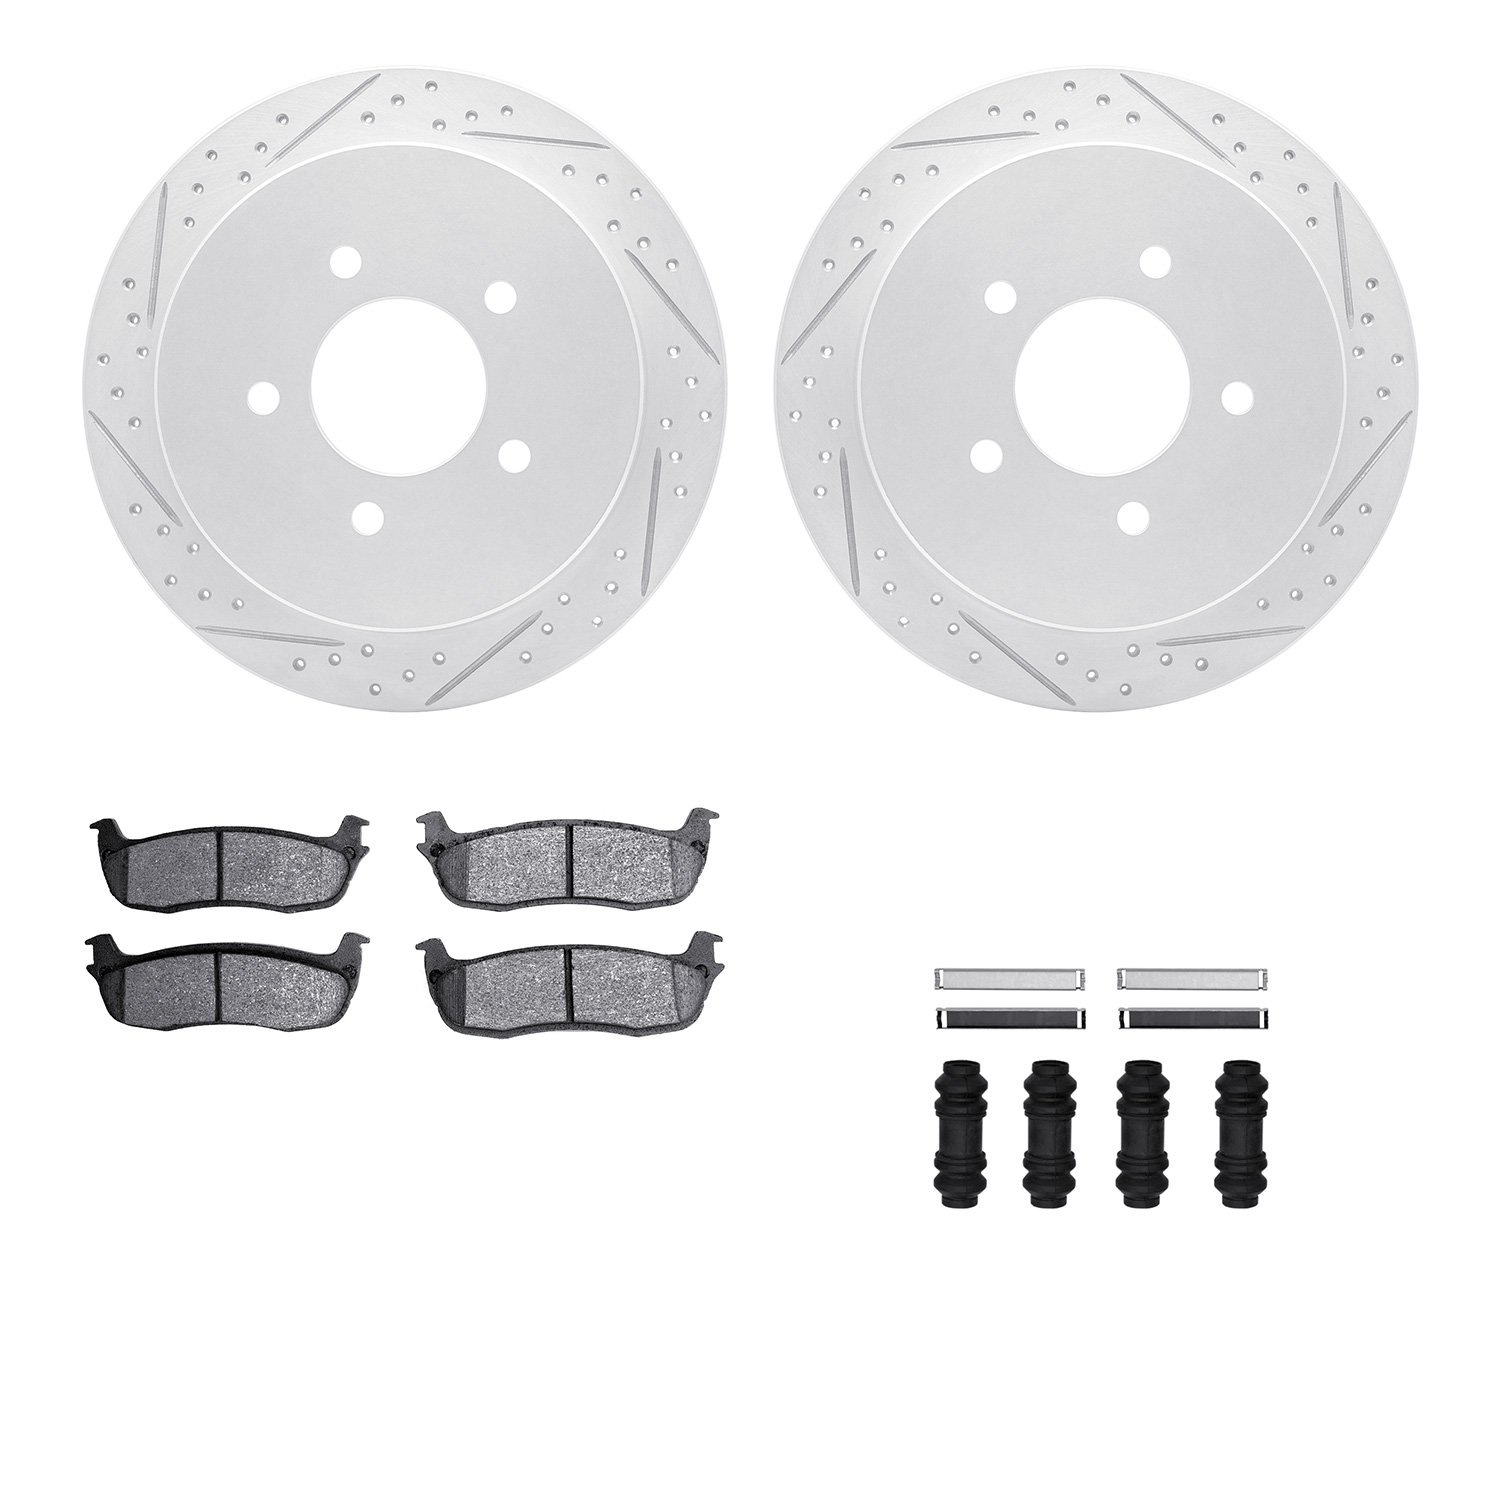 2212-99121 Geoperformance Drilled/Slotted Rotors w/Heavy-Duty Pads Kit & Hardware, 1997-2004 Ford/Lincoln/Mercury/Mazda, Positio